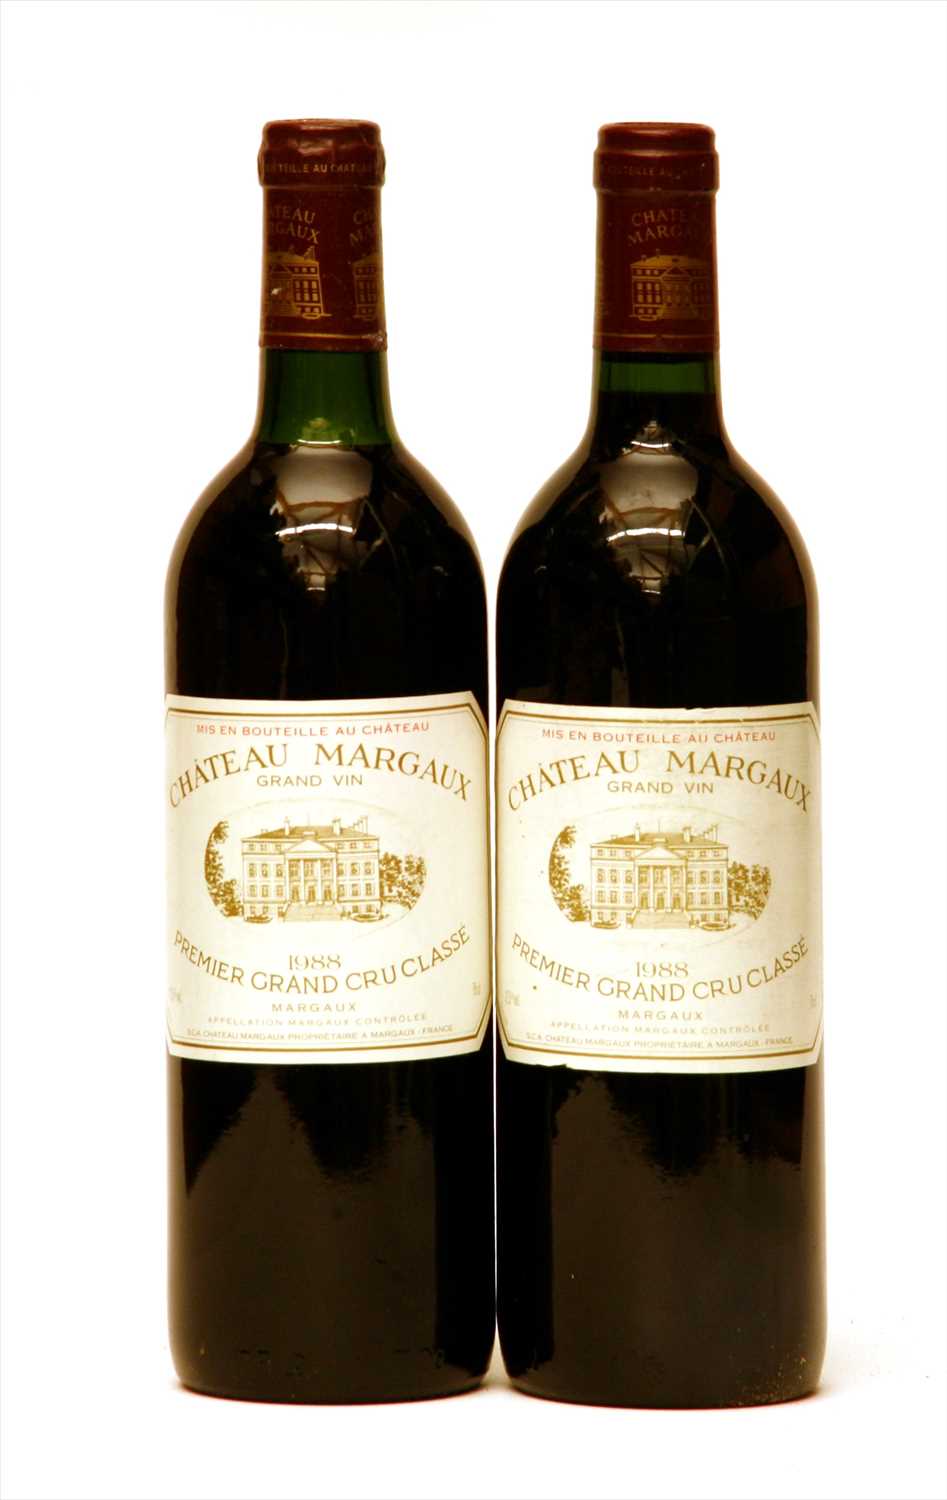 Lot 349 - Château Margaux, Margaux, 1st growth, 1988, two bottles